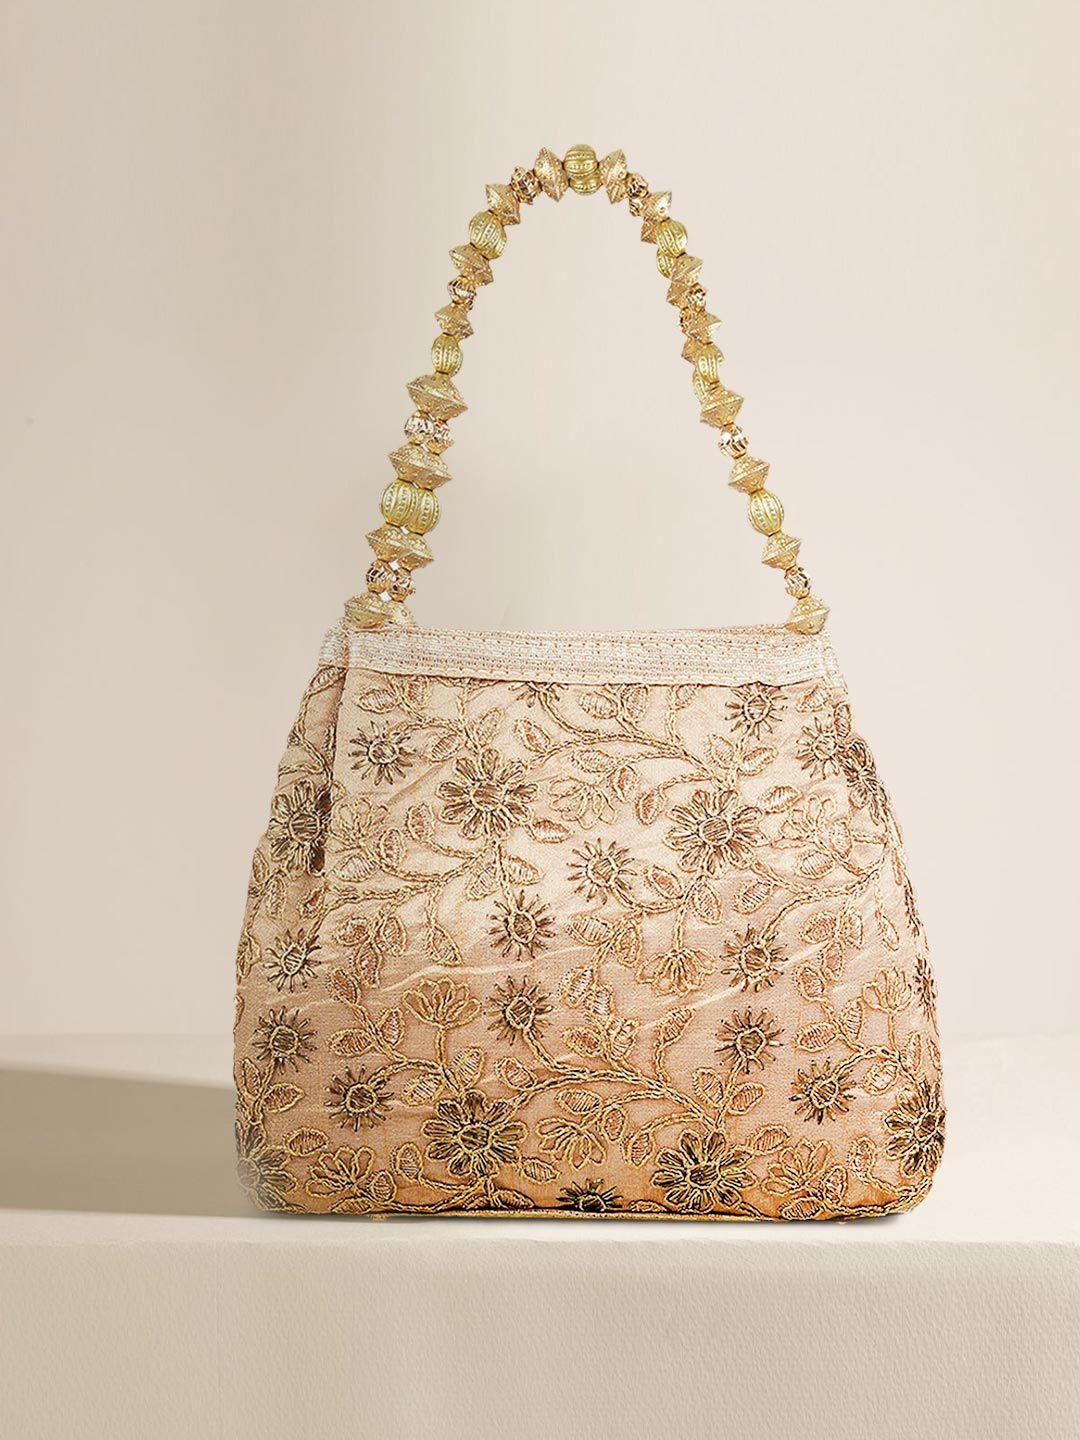 metro gold-toned floral structured handheld bag with applique